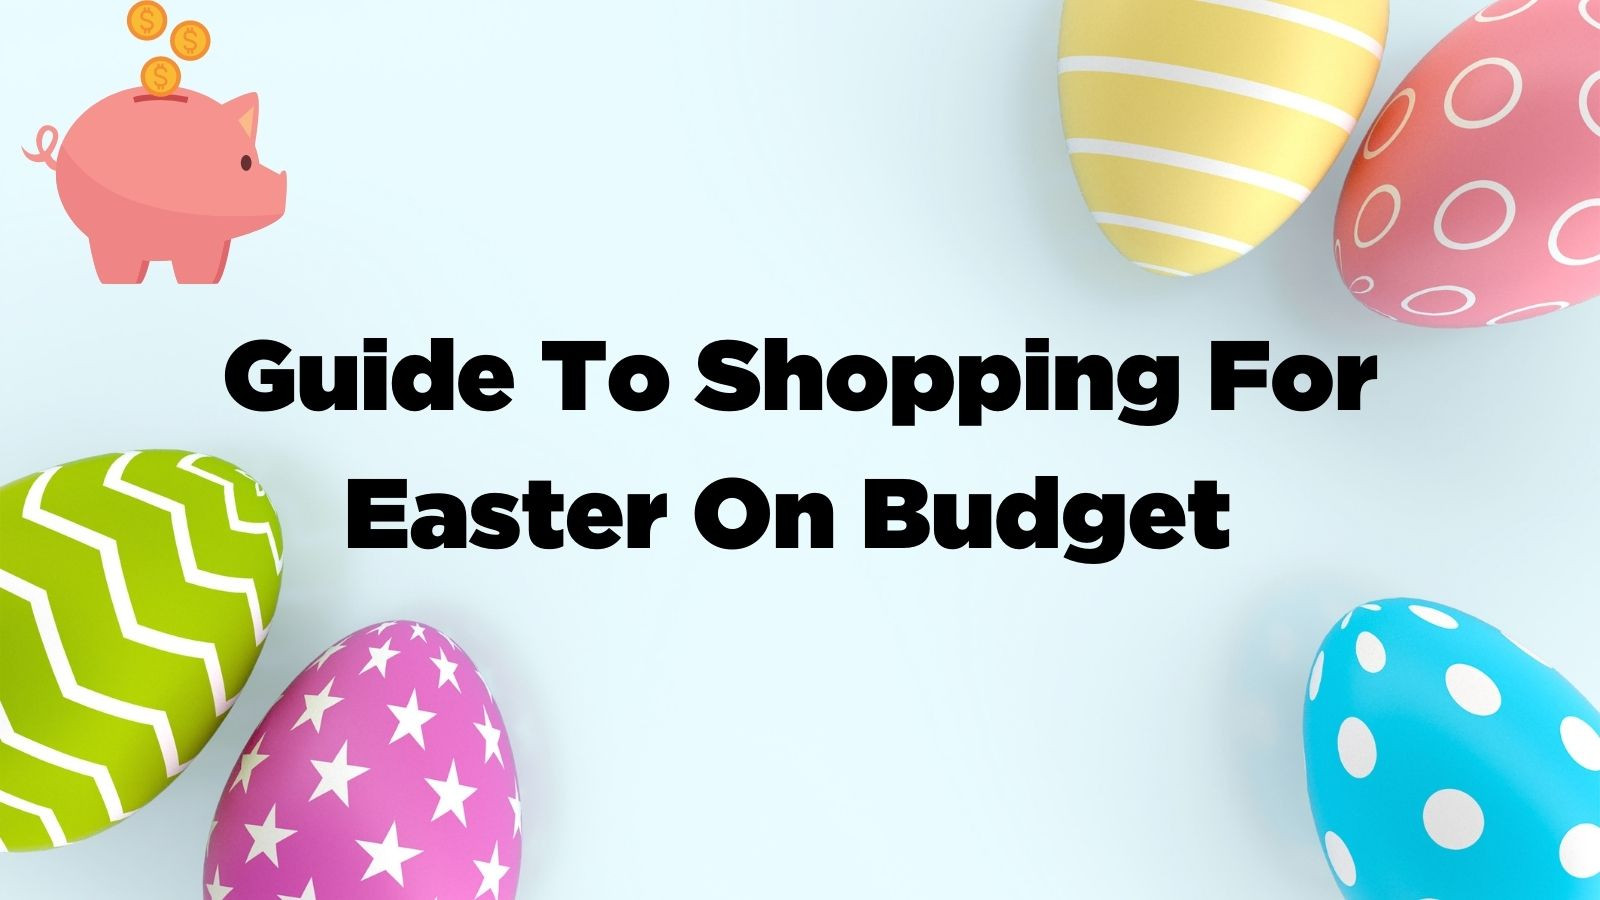 Guide To Shopping For Easter On Budget 